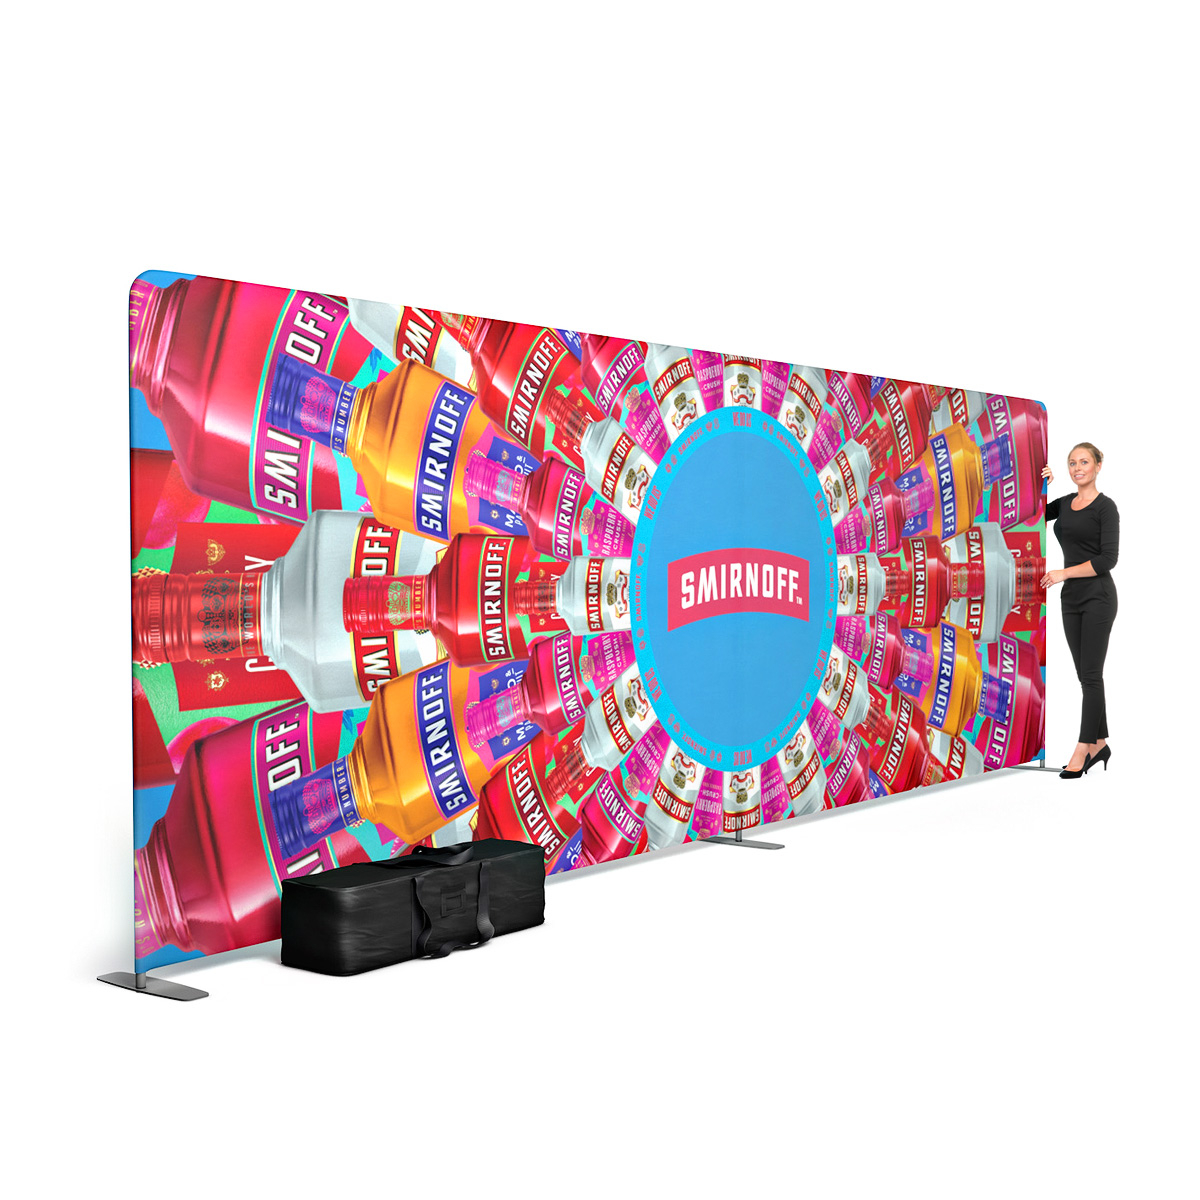 FABRIWALL® Tension Fabric Exhibition Stand Backwall 6m x 2m